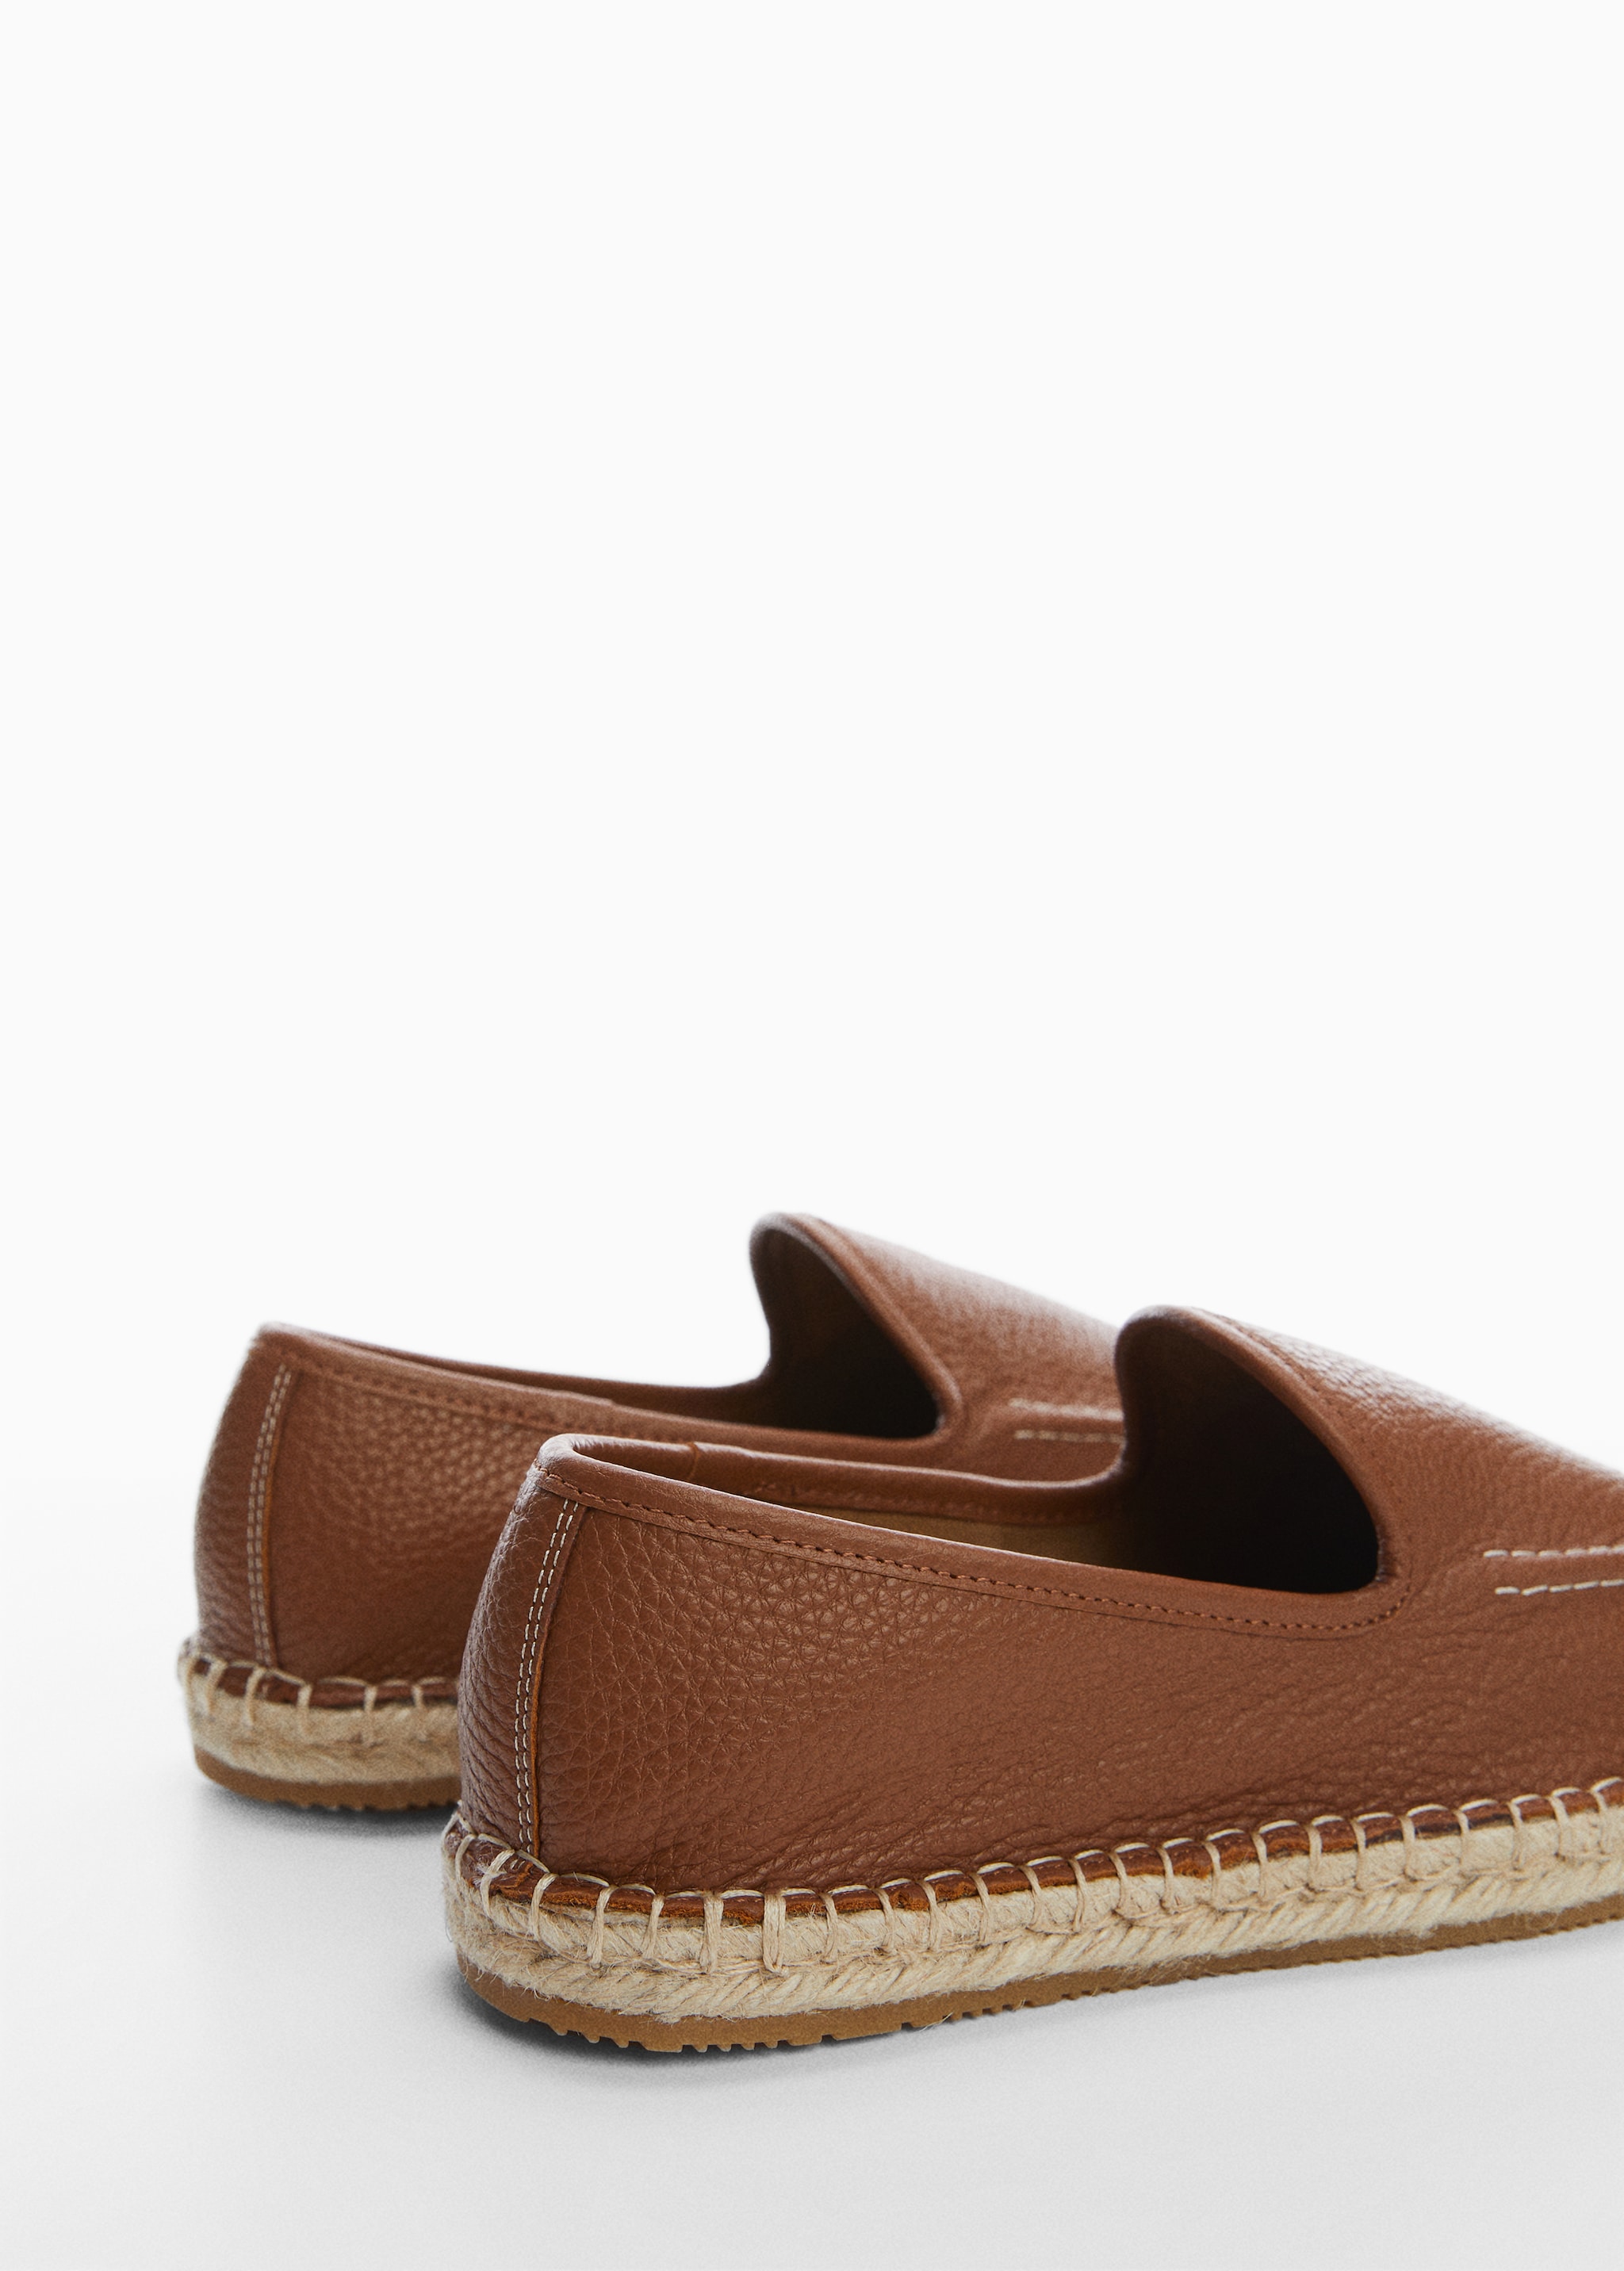 Jute leather espadrilles - Details of the article 2